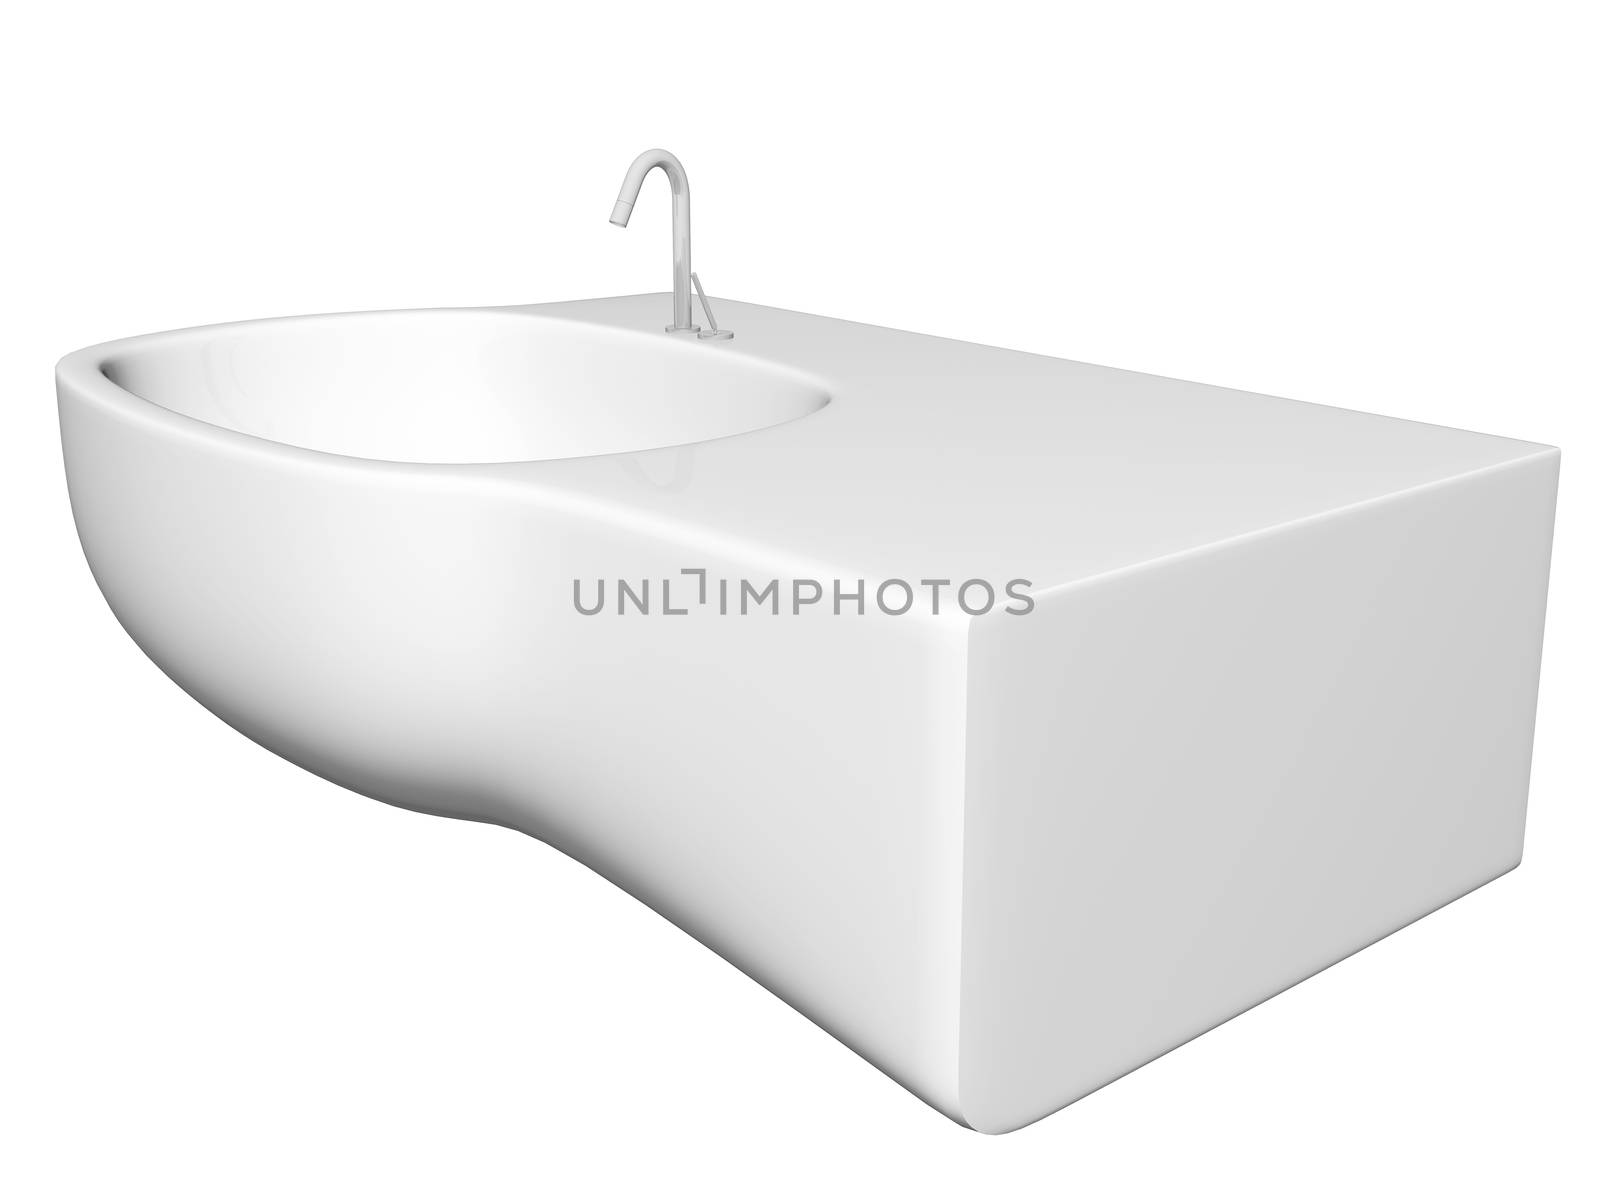 Modern washbasin or sink with faucet and plumbing fixtures, isolated against a white background. by Morphart